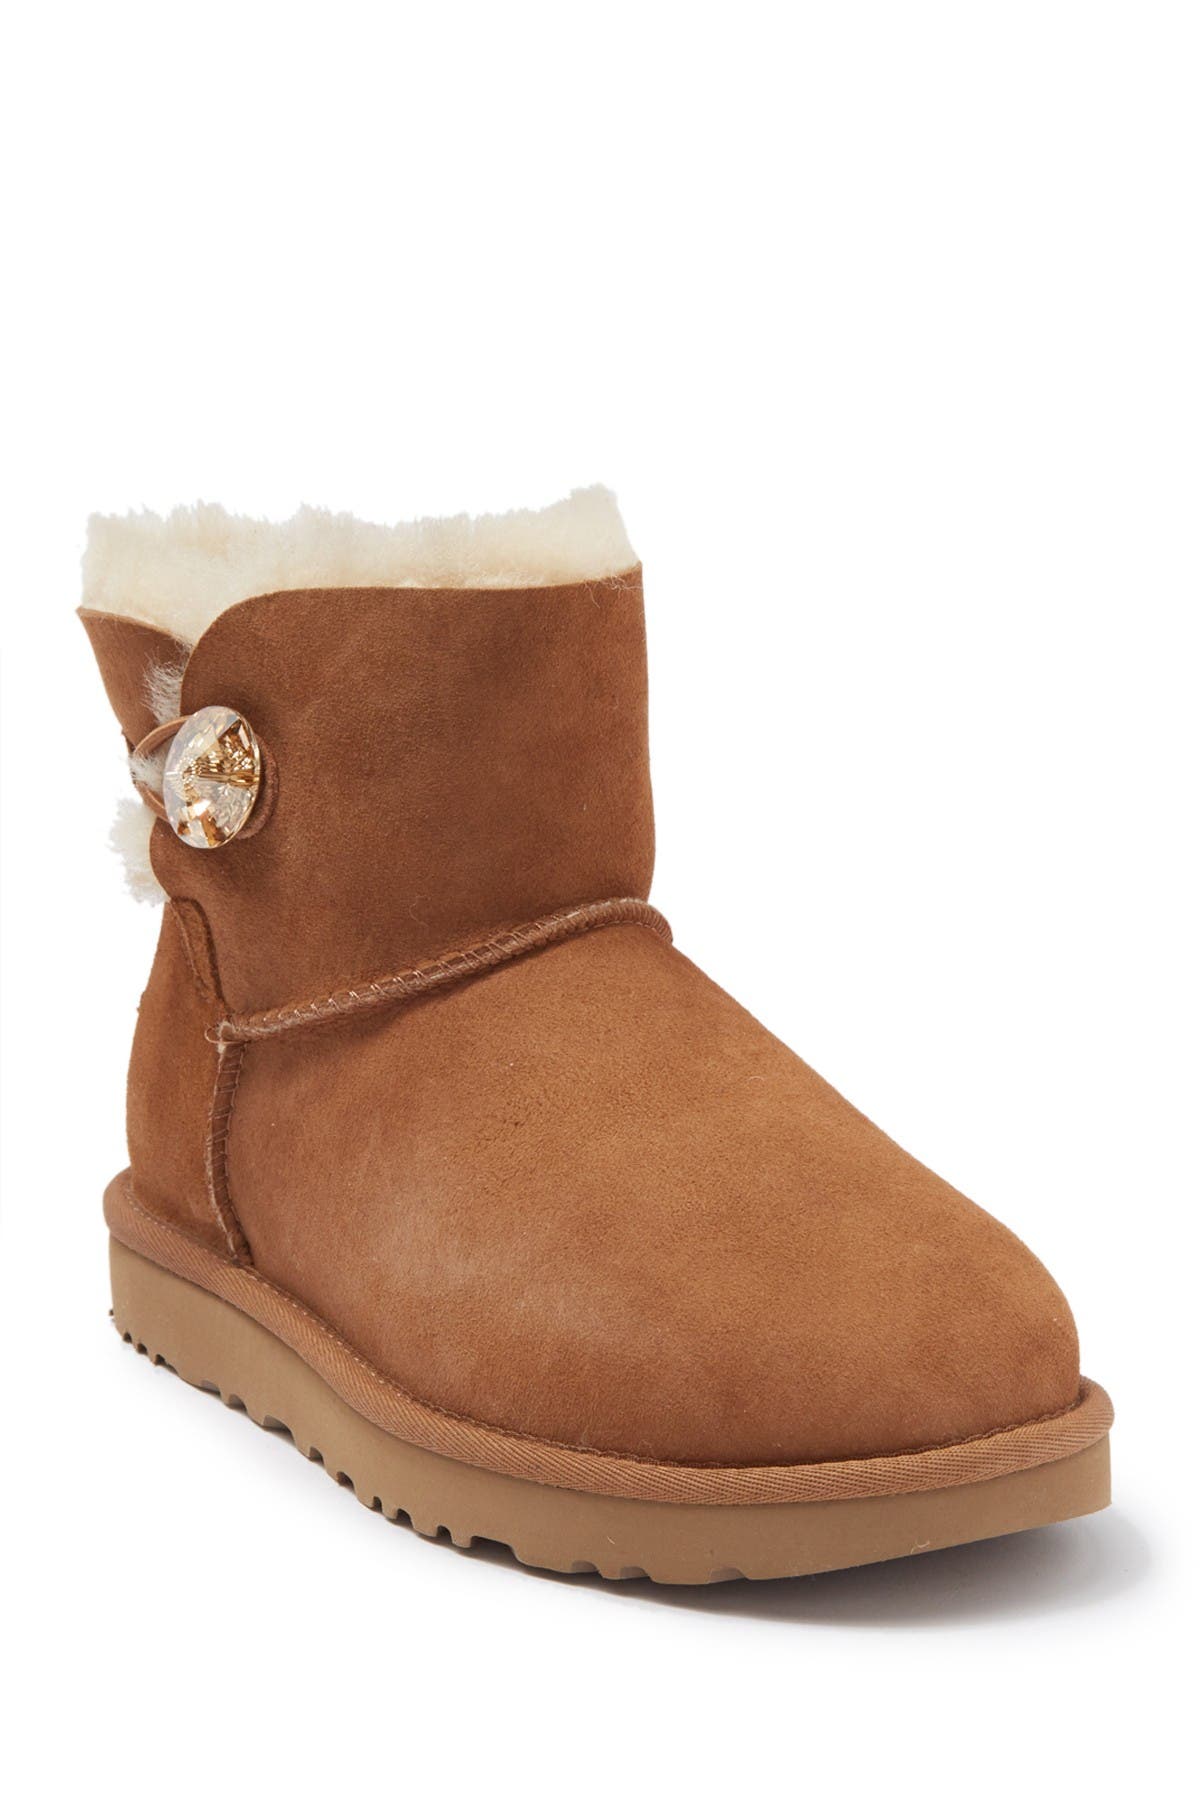 ugg boots button bling